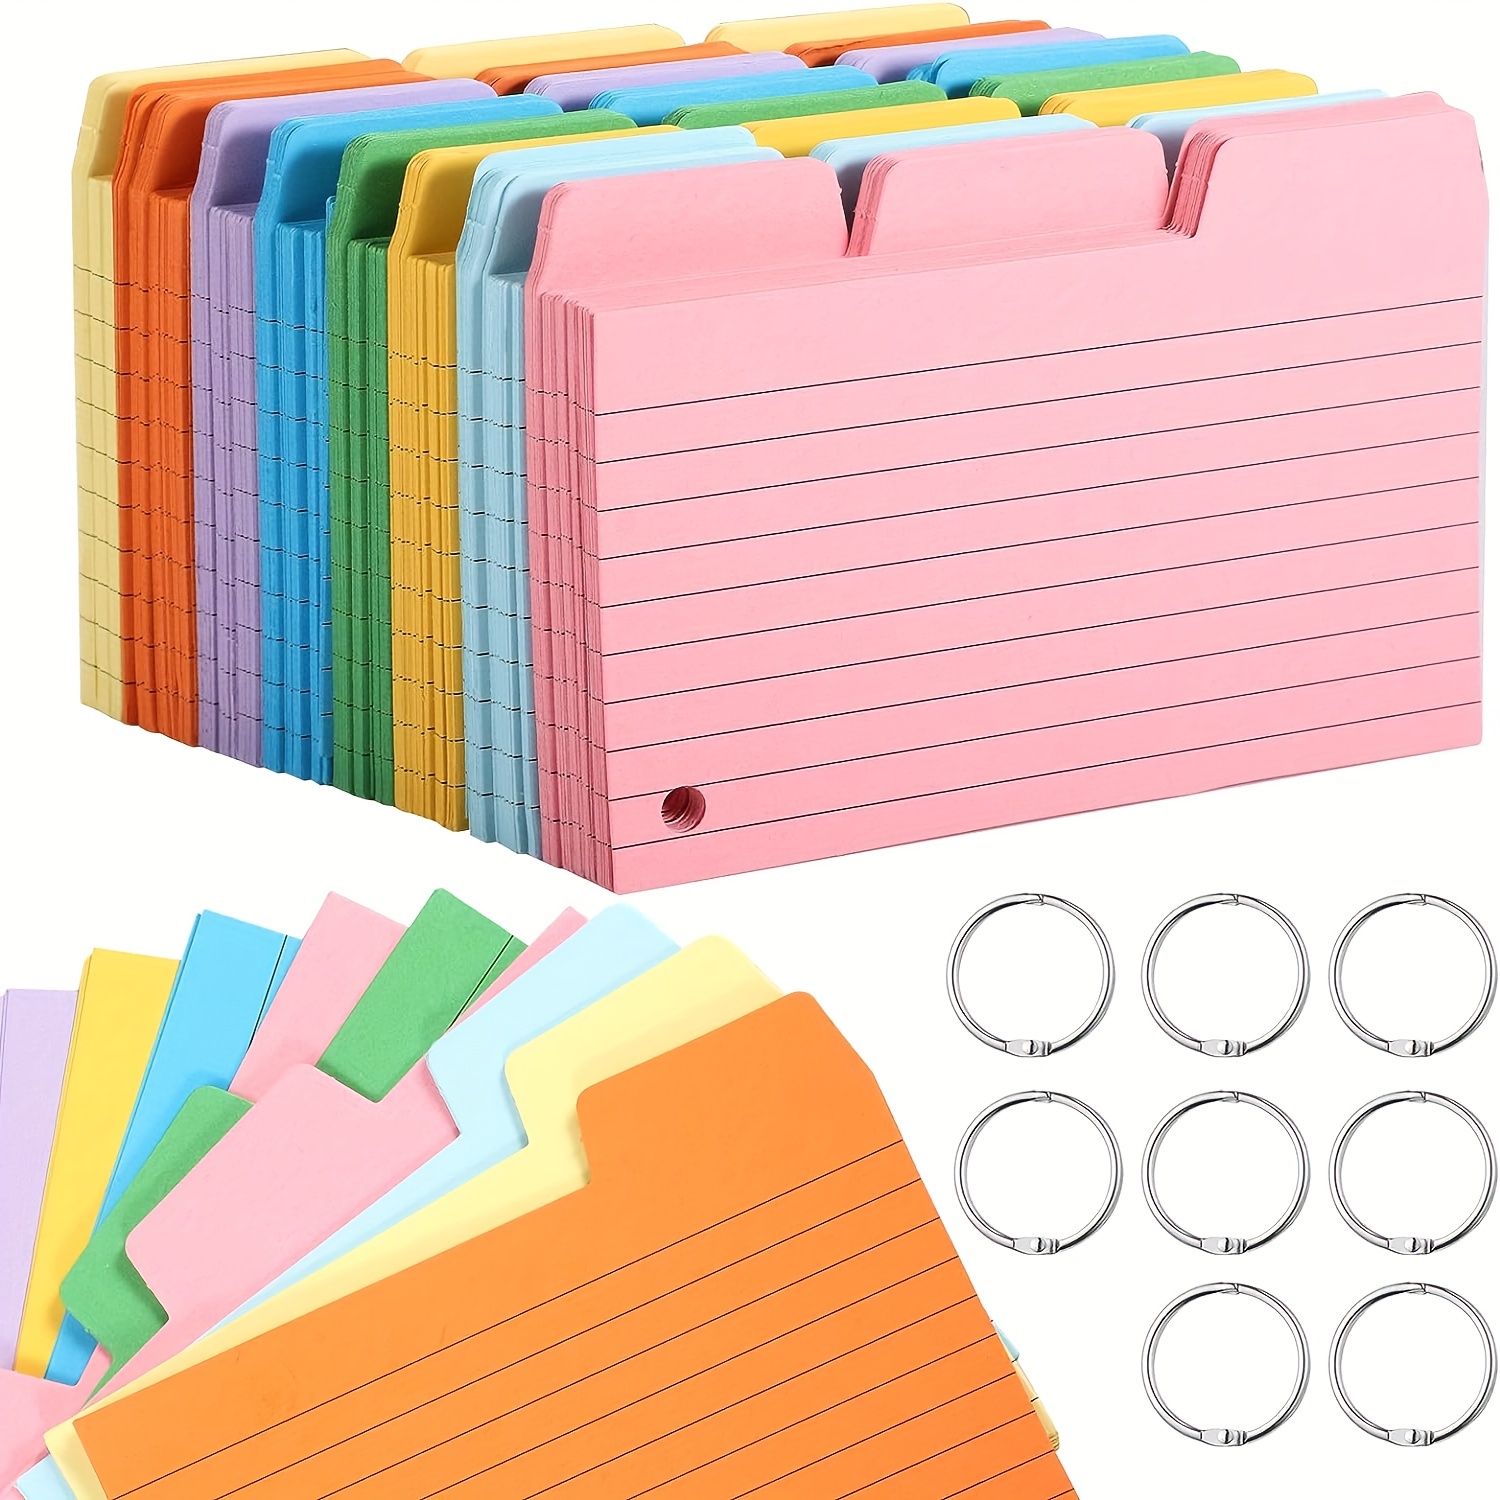 150 Pcs Cards Office Index Cards Message Study Cards Lined Index Cards  Ruled Index Cards Flash Cards Paper For Students School - AliExpress